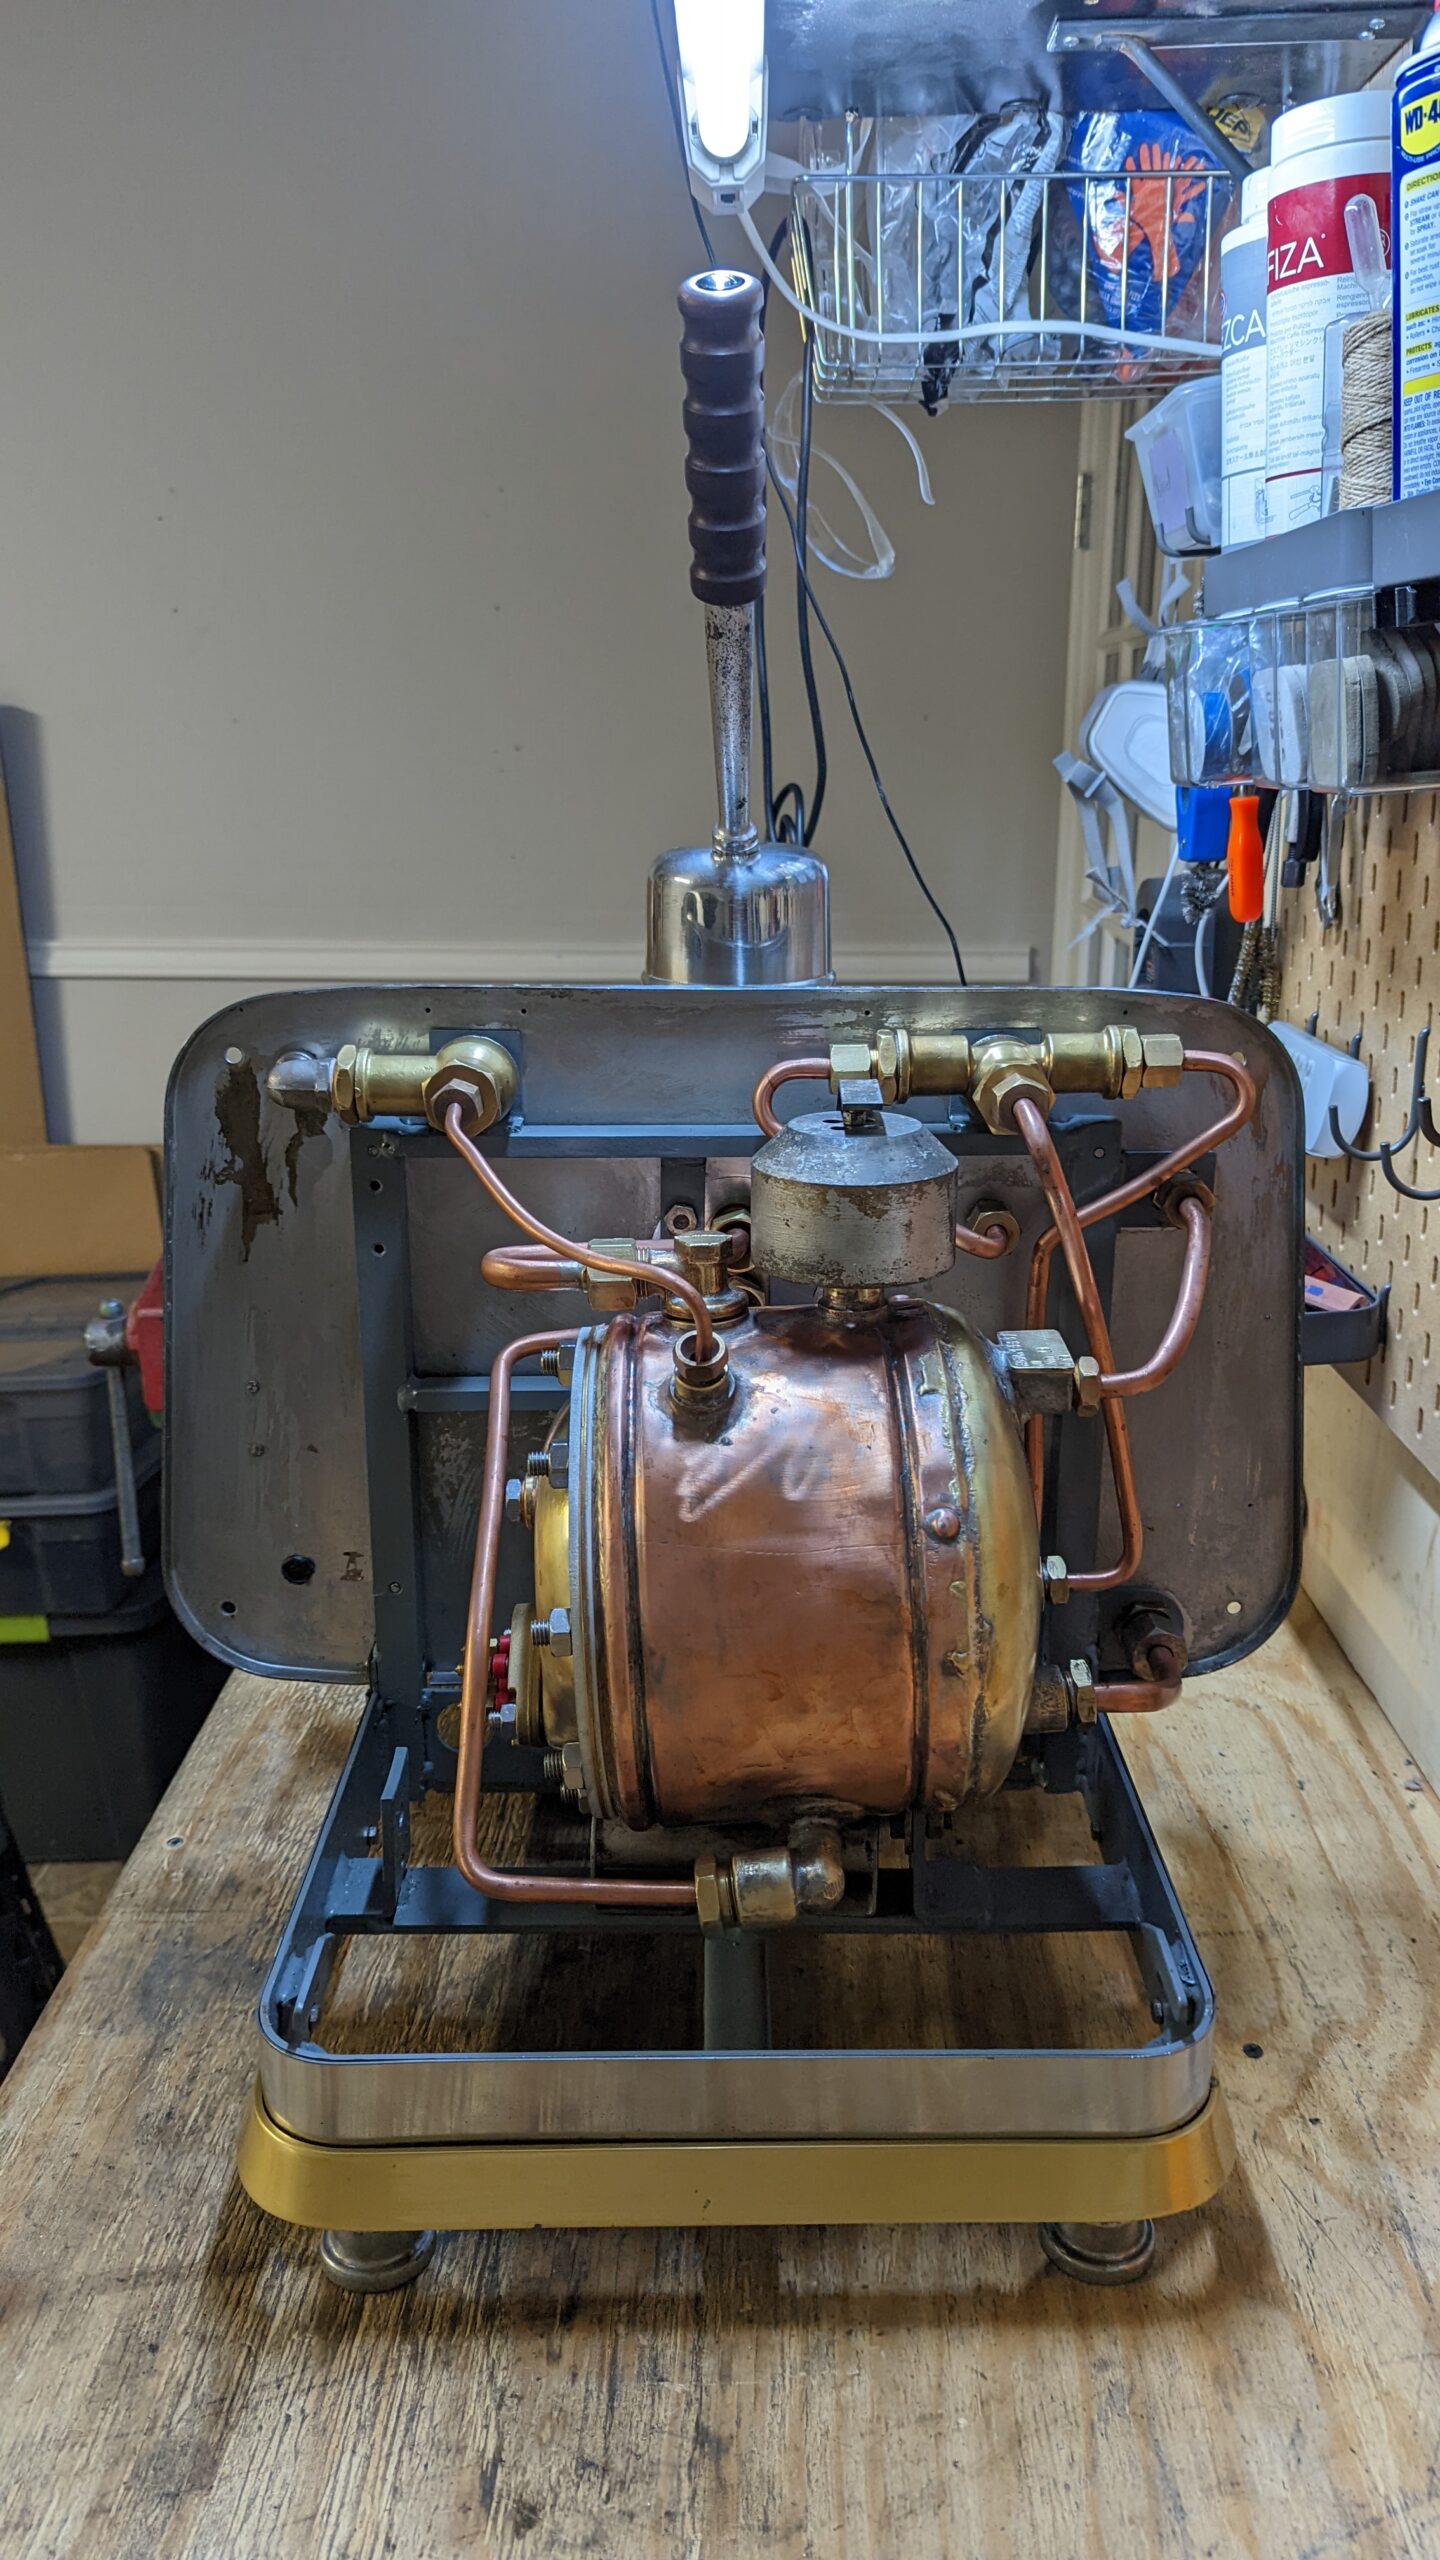 FAEMA Urania: Boiler Disassembly and Cleaning